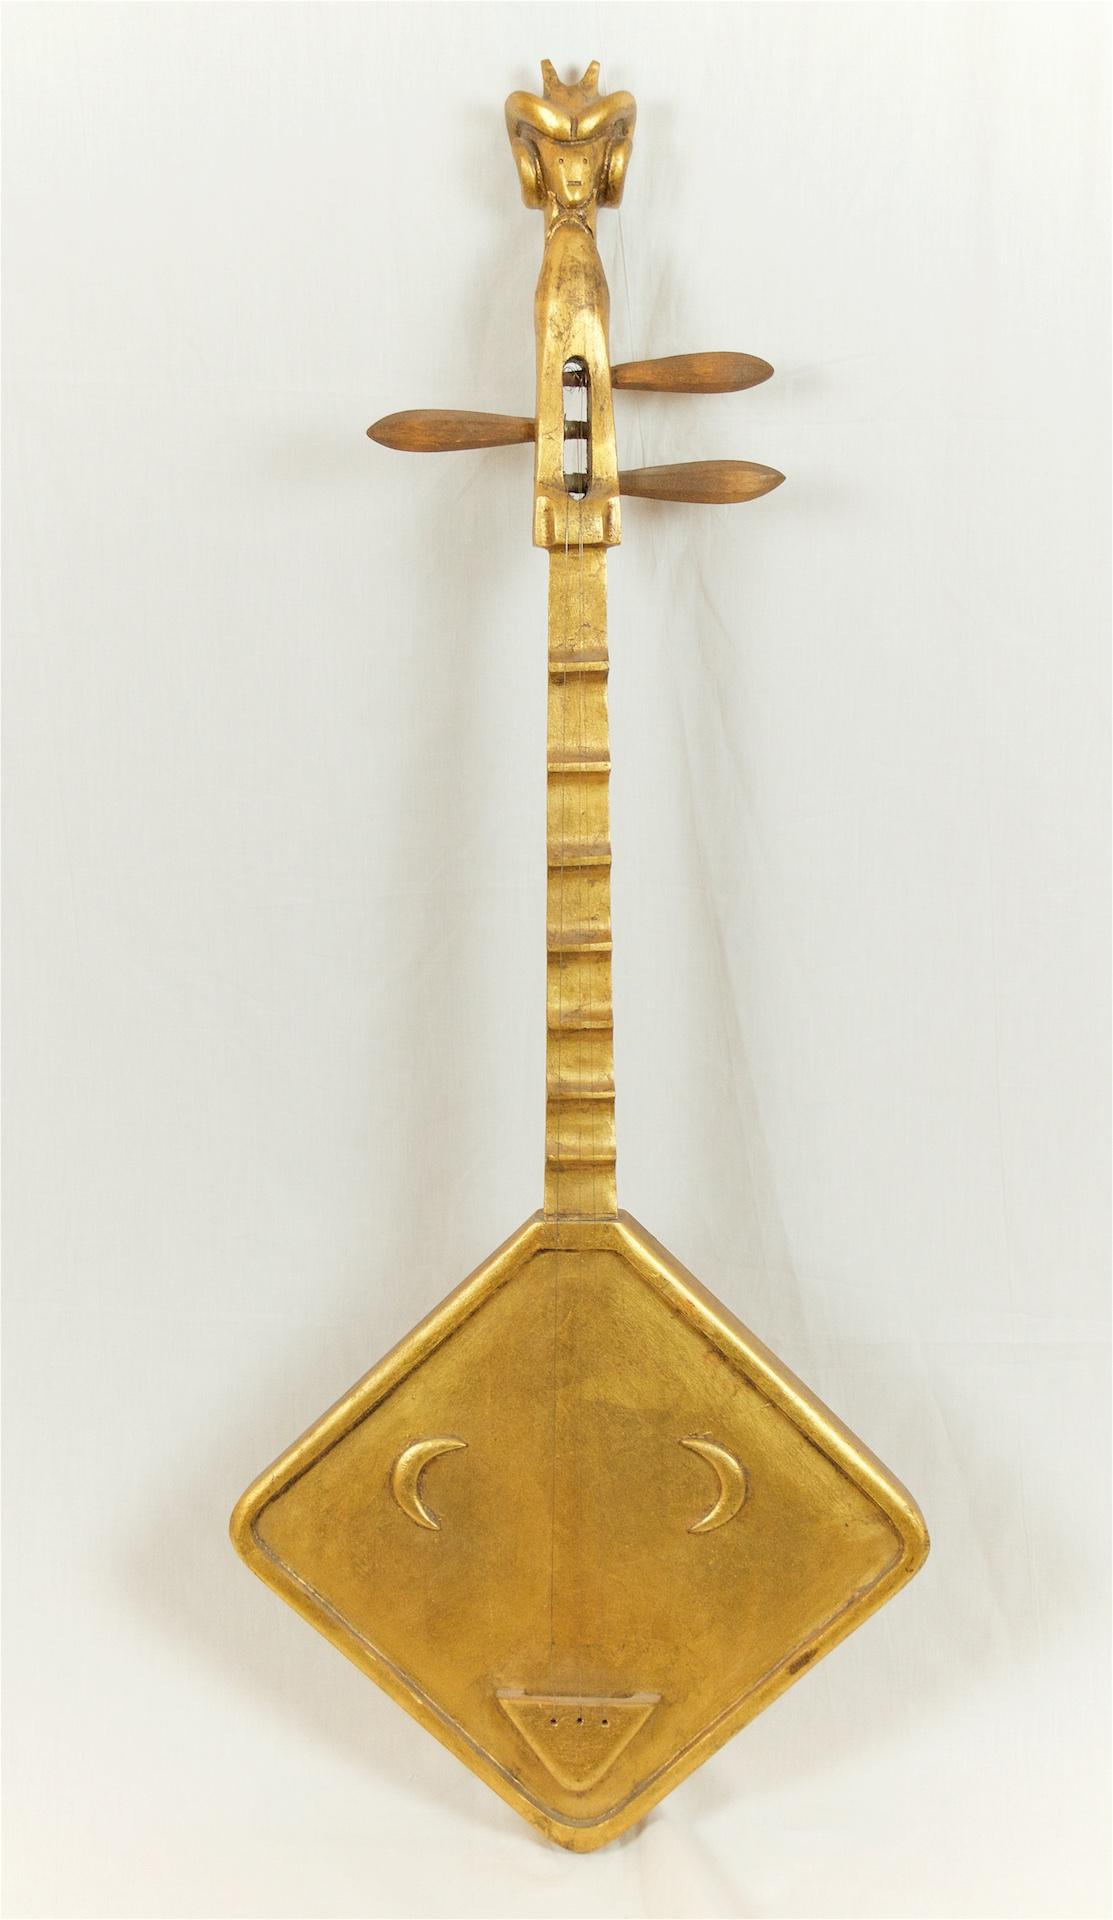 Decorative musical instrument in carved wood with gilt finish, featuring strings, turnings and a carved animal's face at the headstock. Whimsical accent piece can be hung with a single triangle hook on back.